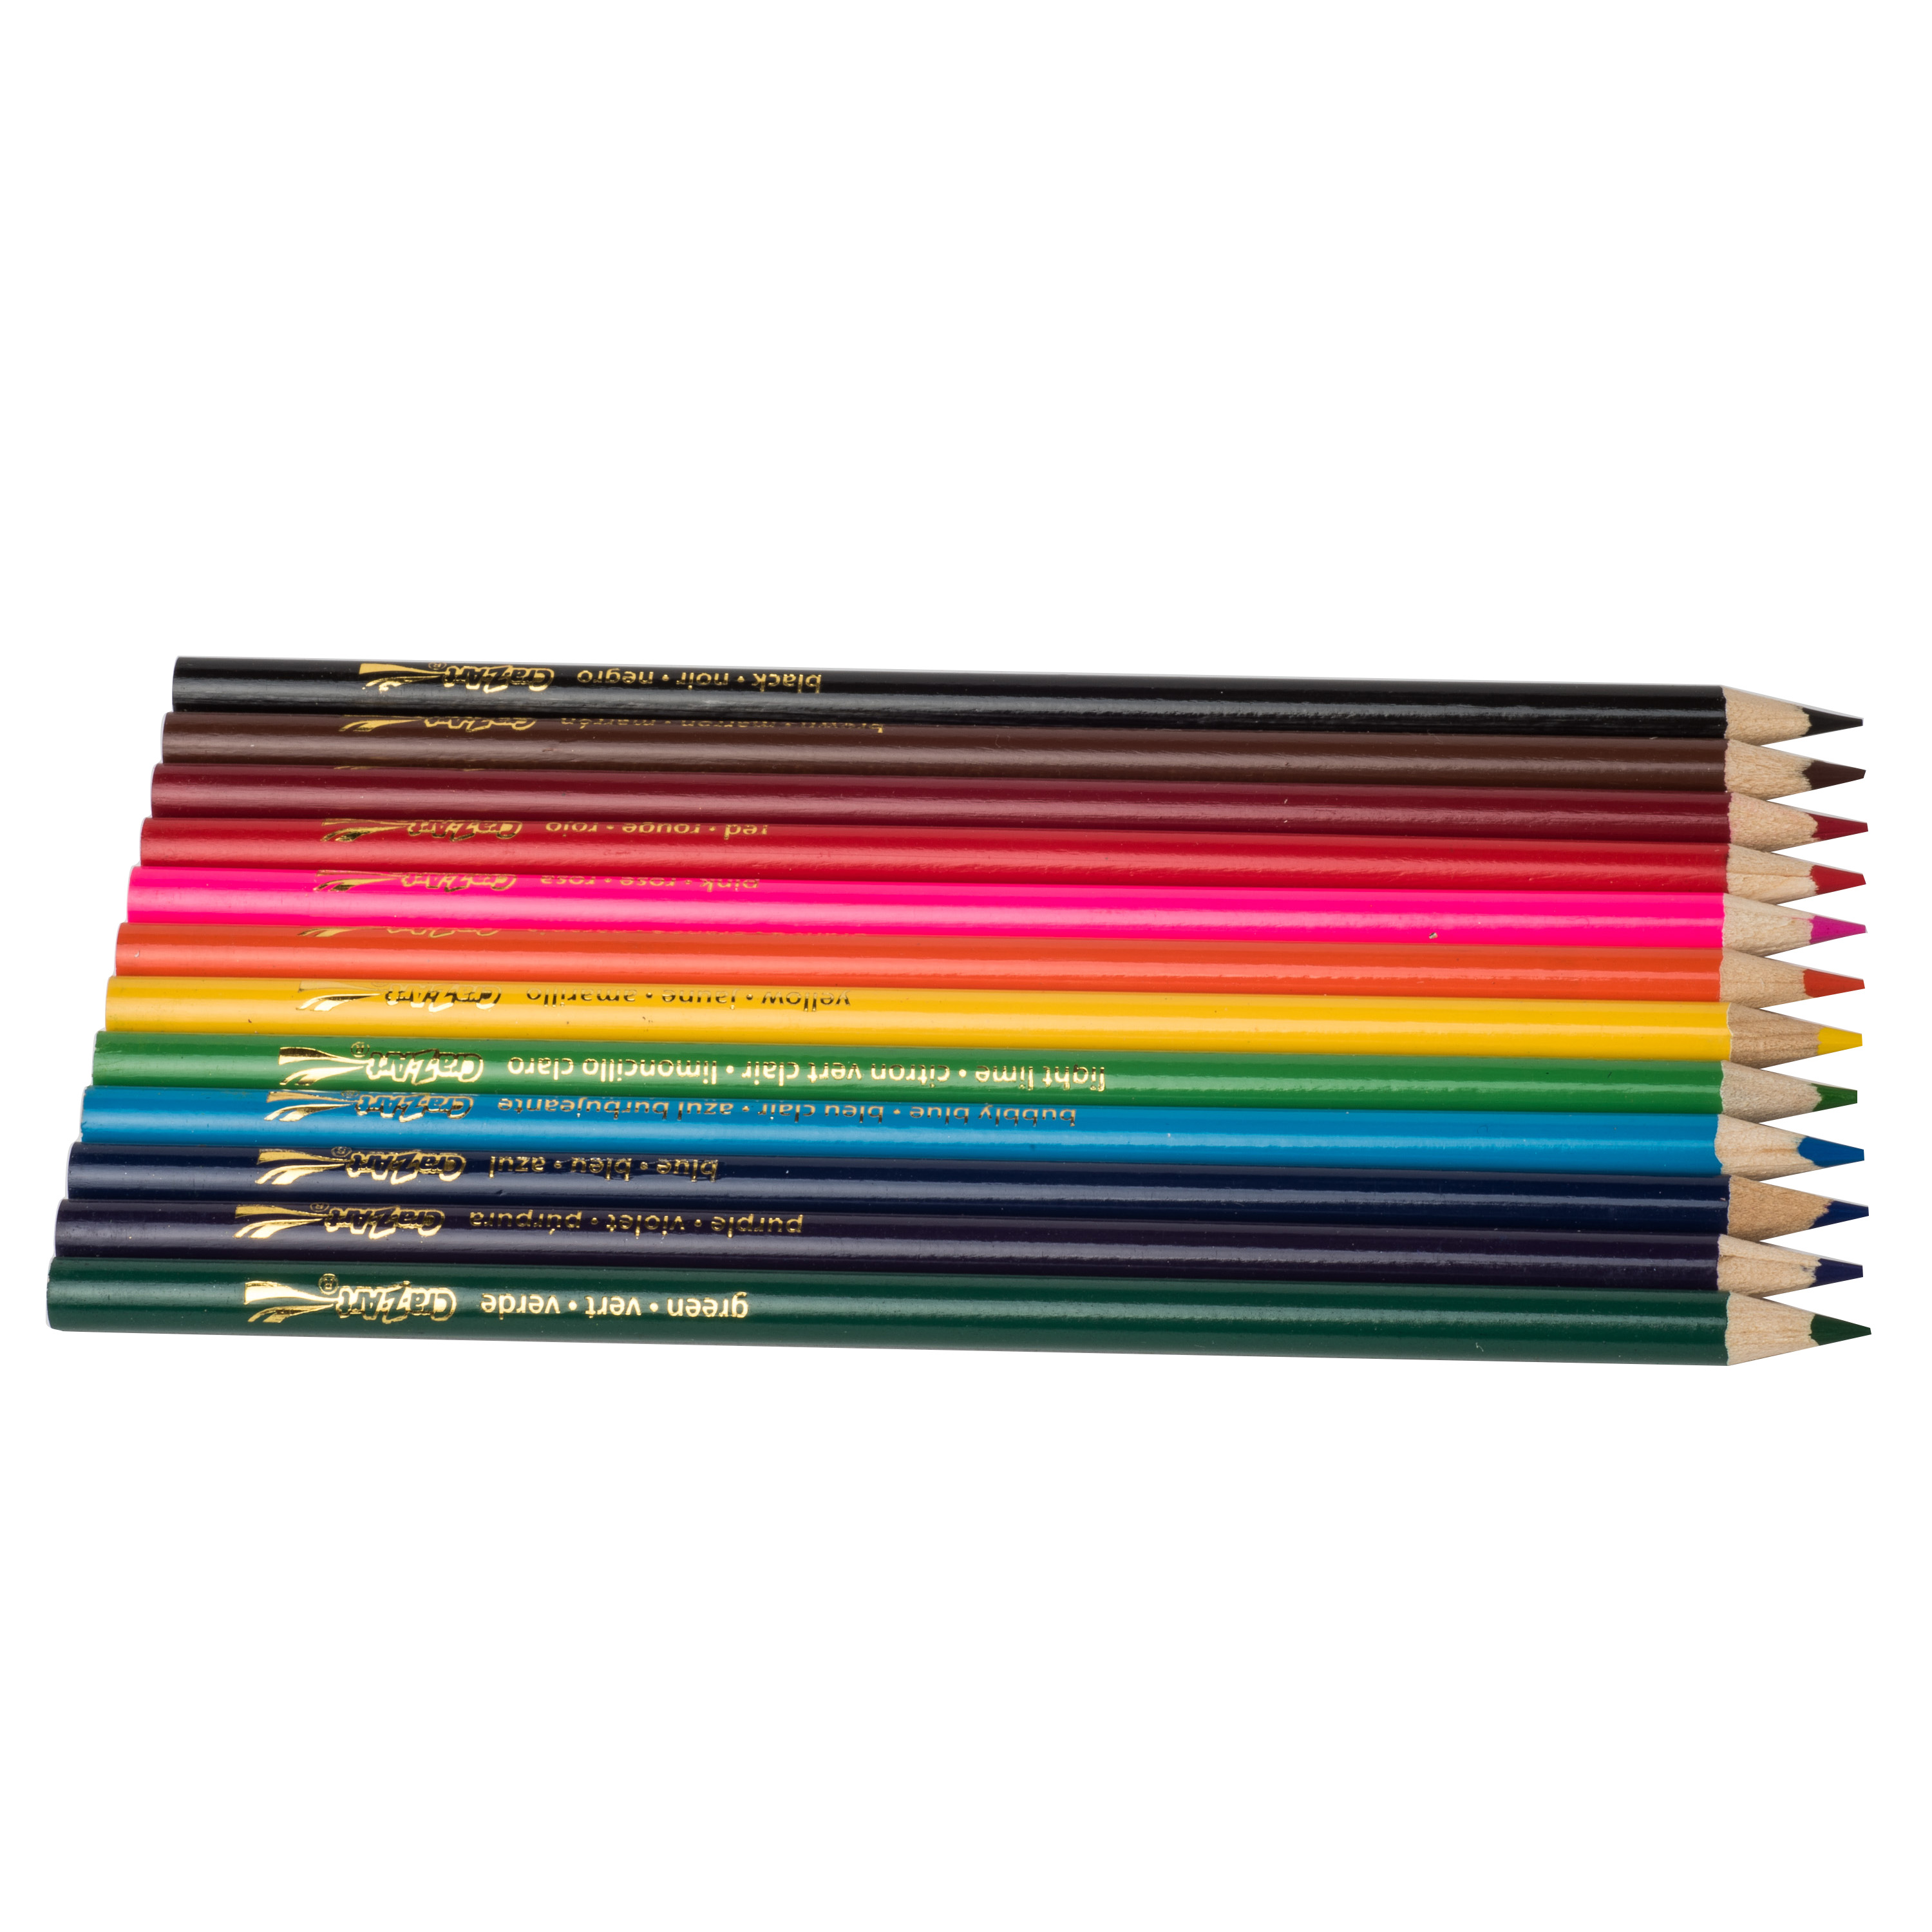 Cra-Z-Art Colored Pencils, 12 Count, Beginner Child to Adult, Back to School Supplies - image 6 of 11